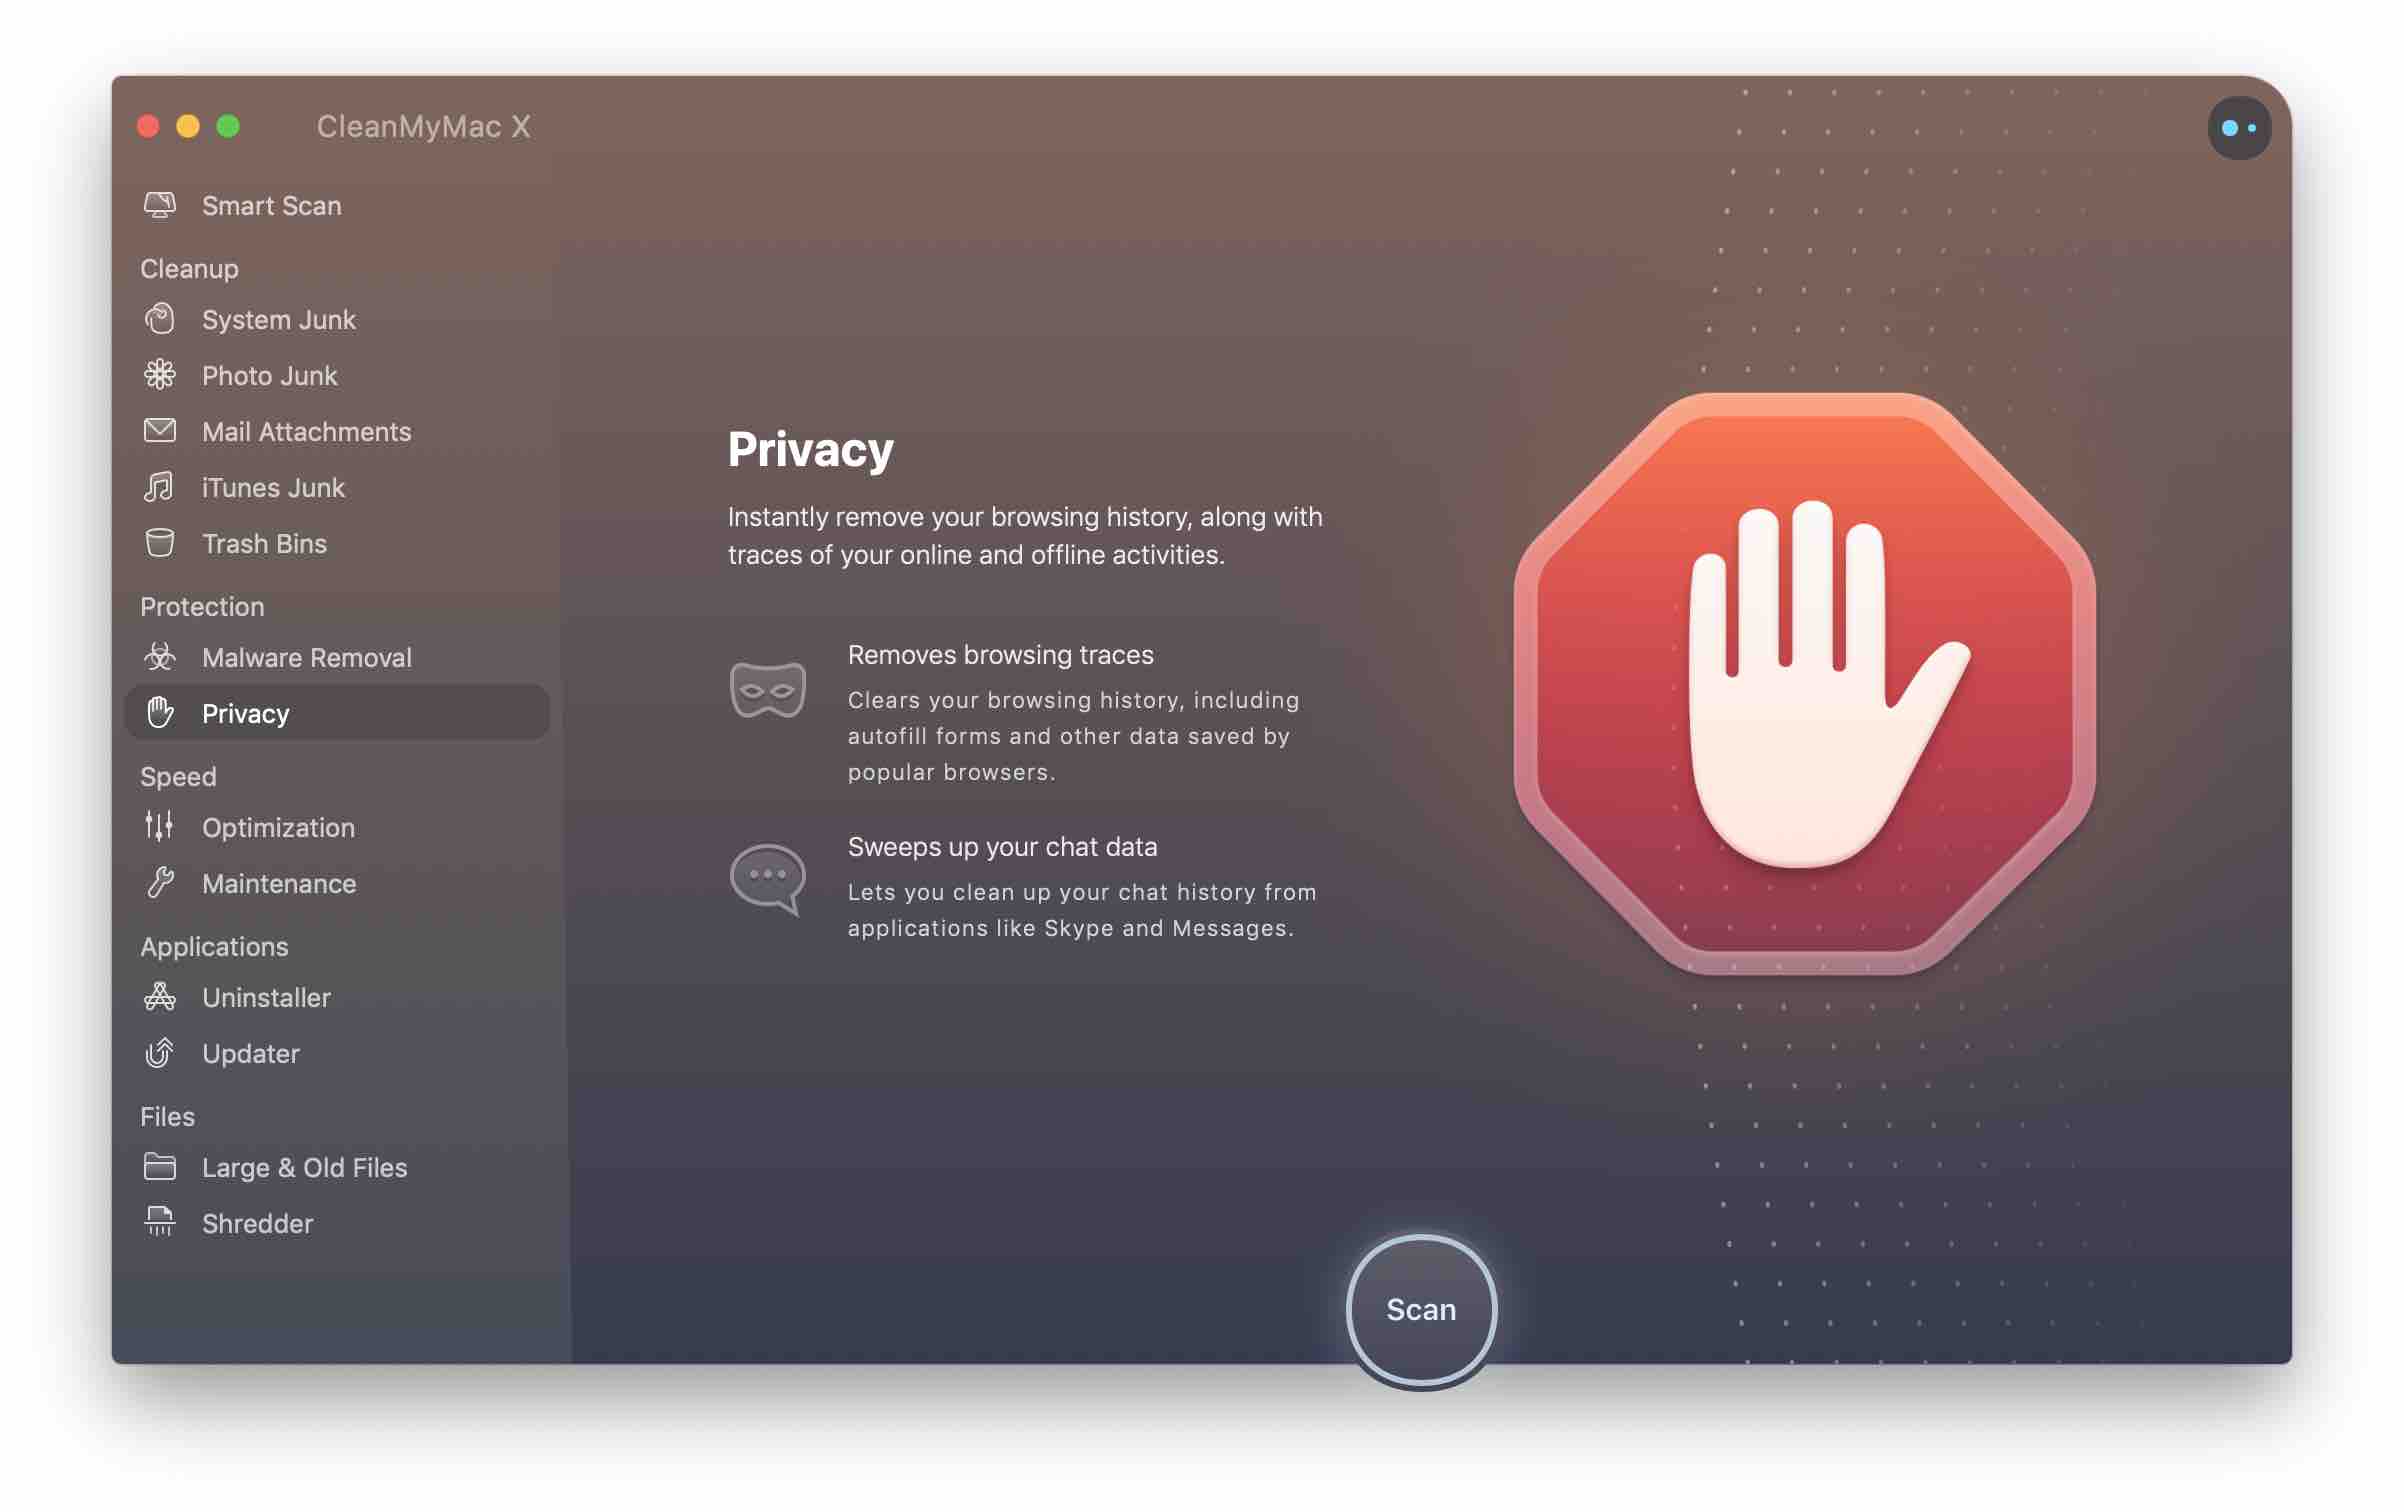 cleanmymac x - privacy